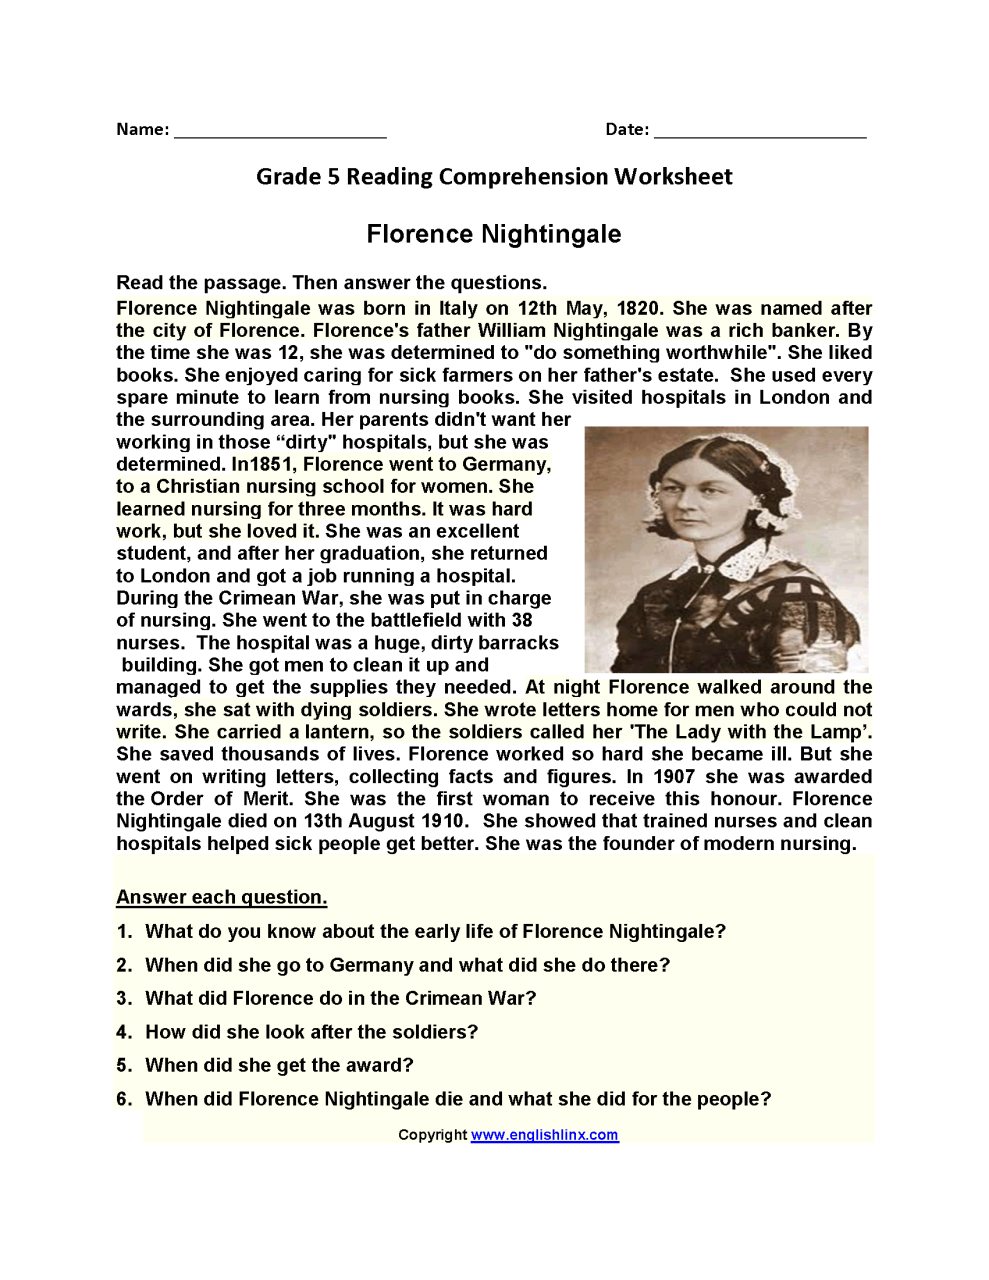 Theme Worksheets 4th Grade Common Core